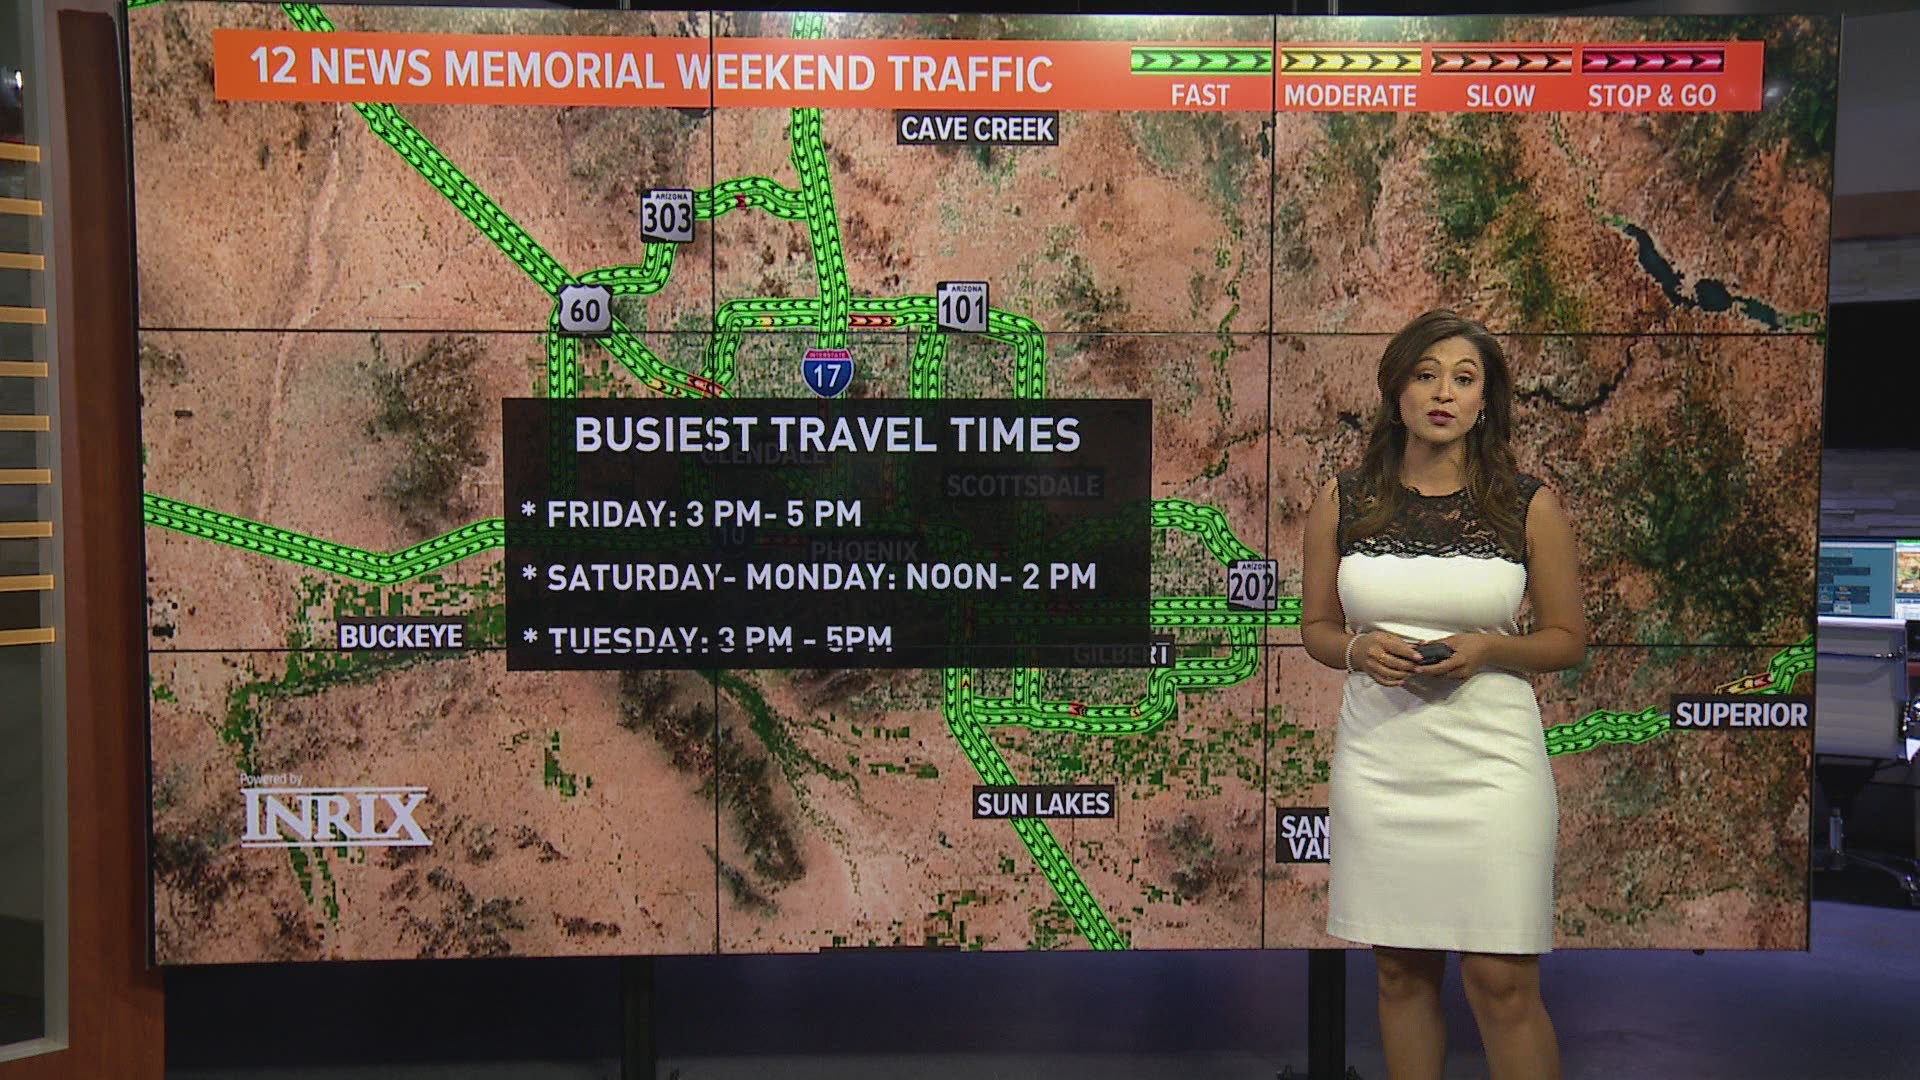 Here's your weekend traffic outlook for May 25-28.